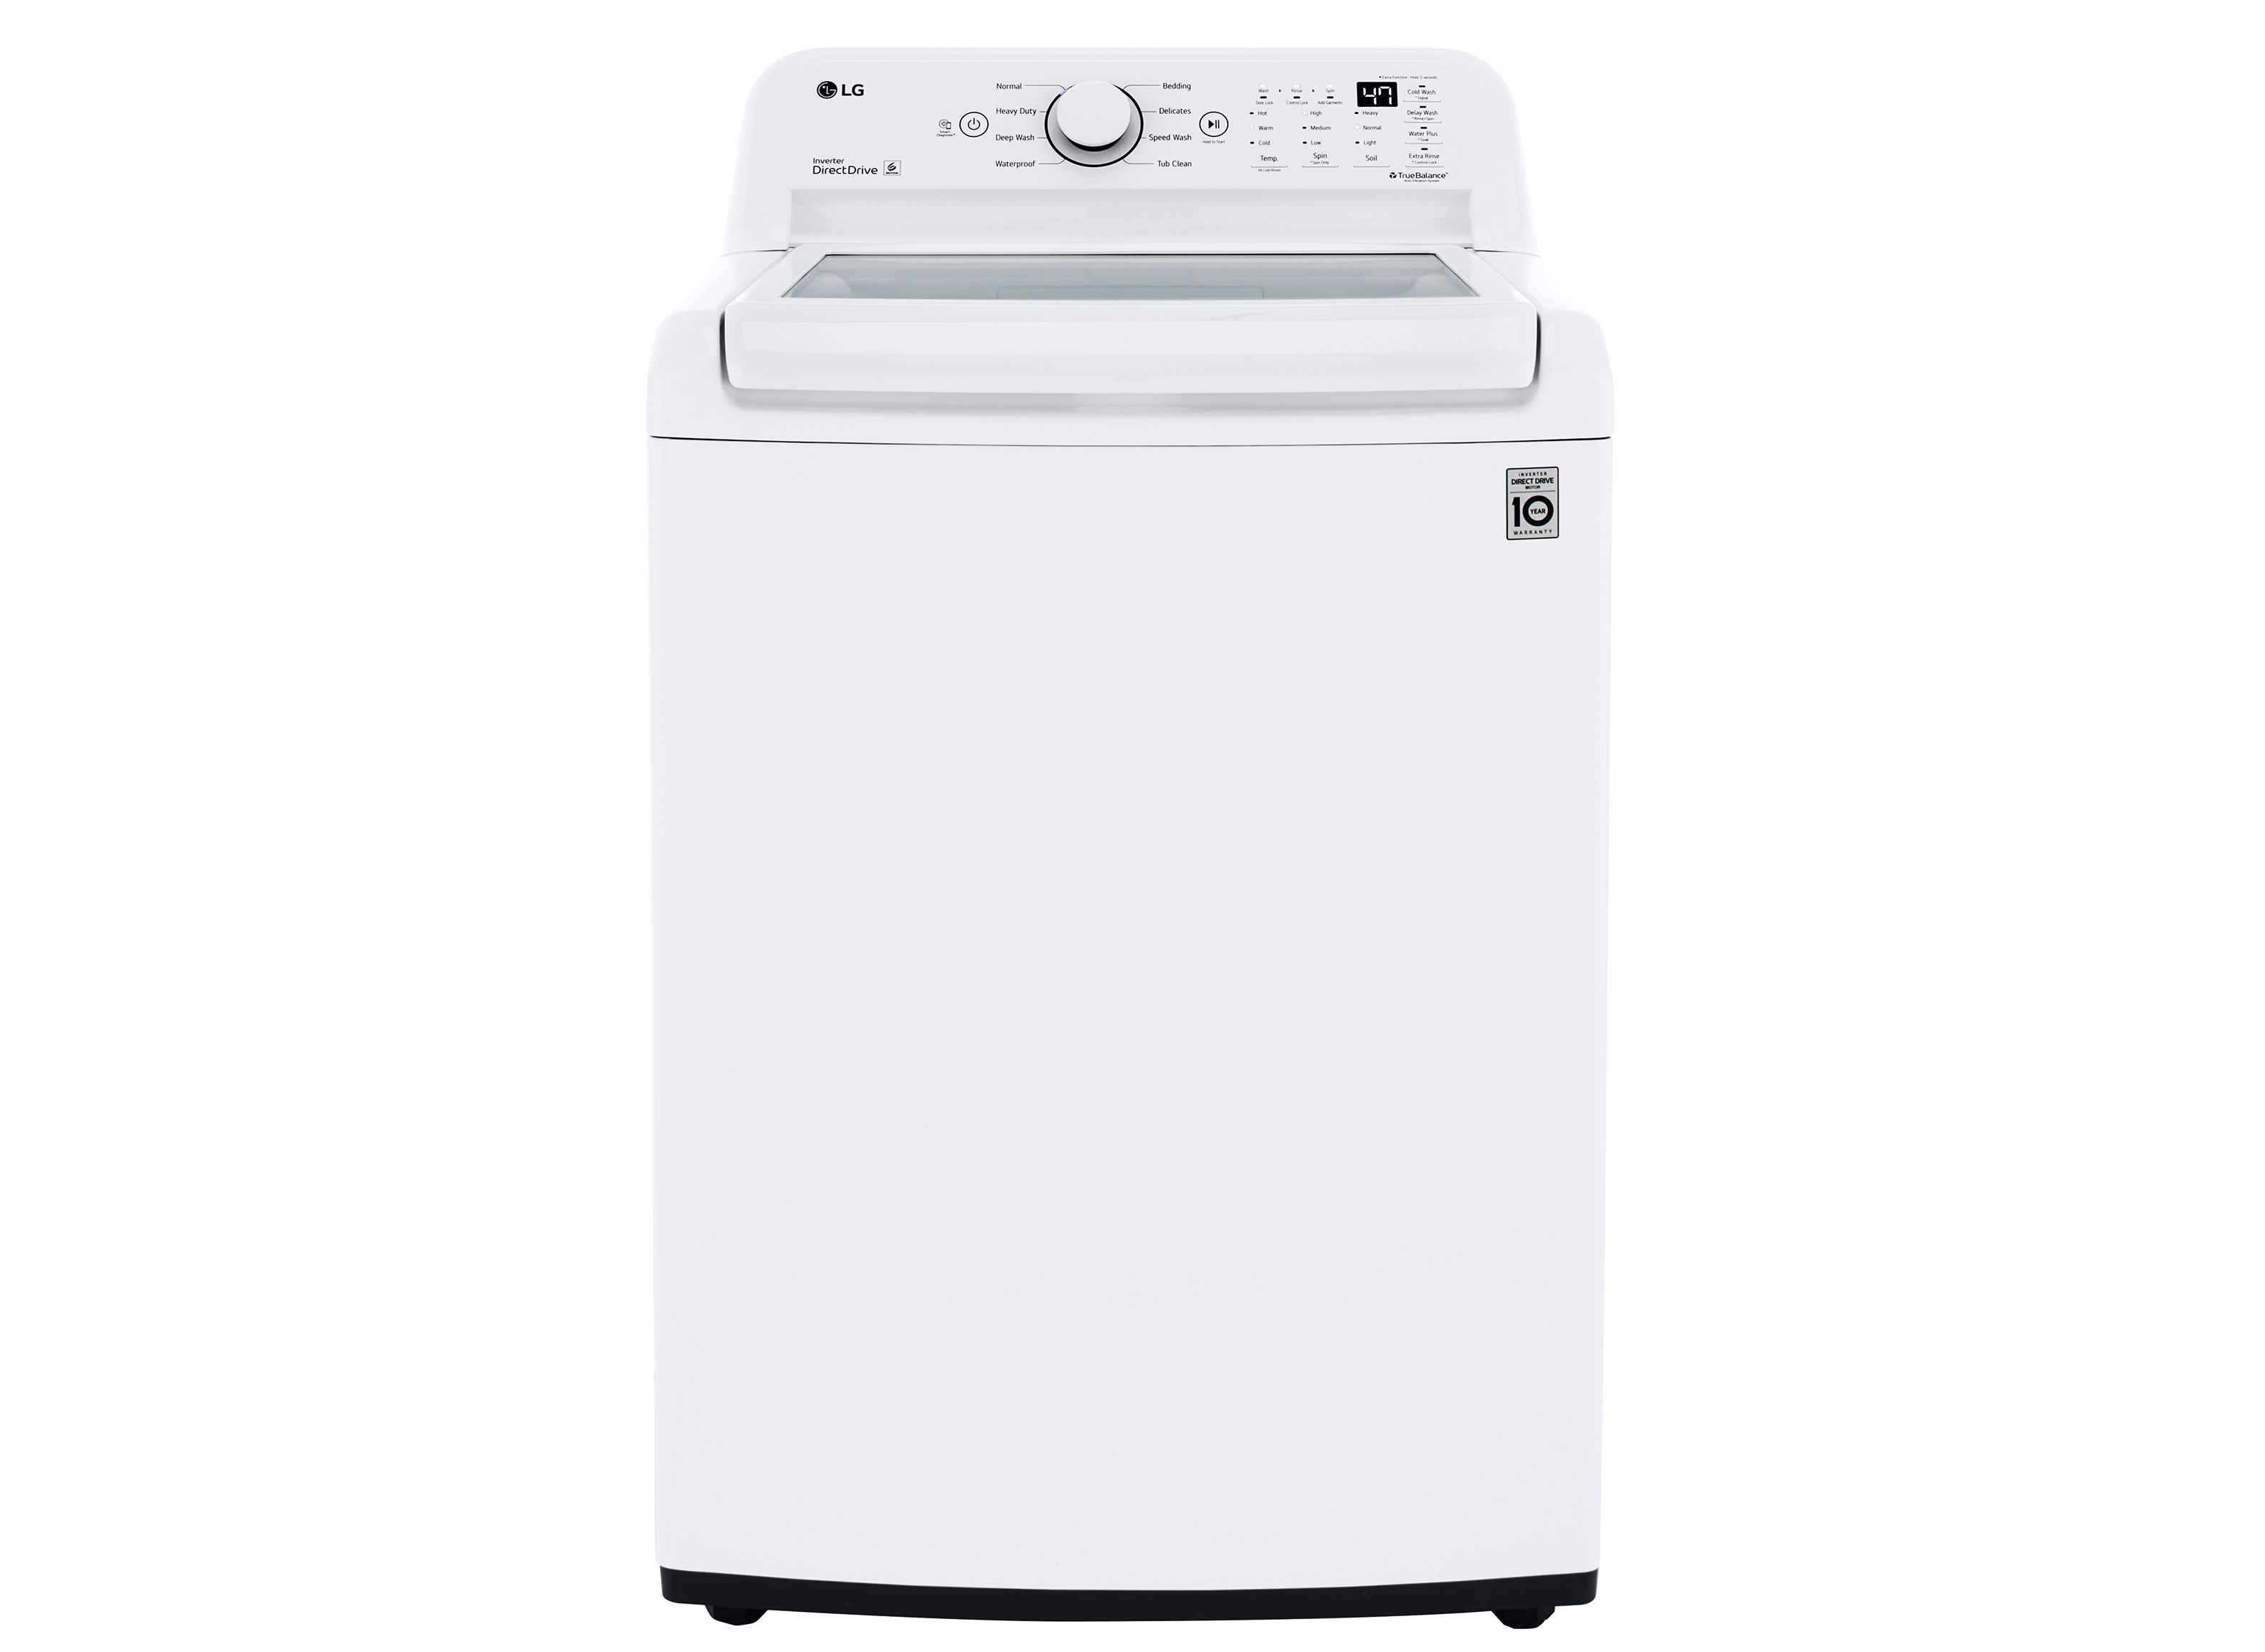 How To Clean A Top Load Washing Machine